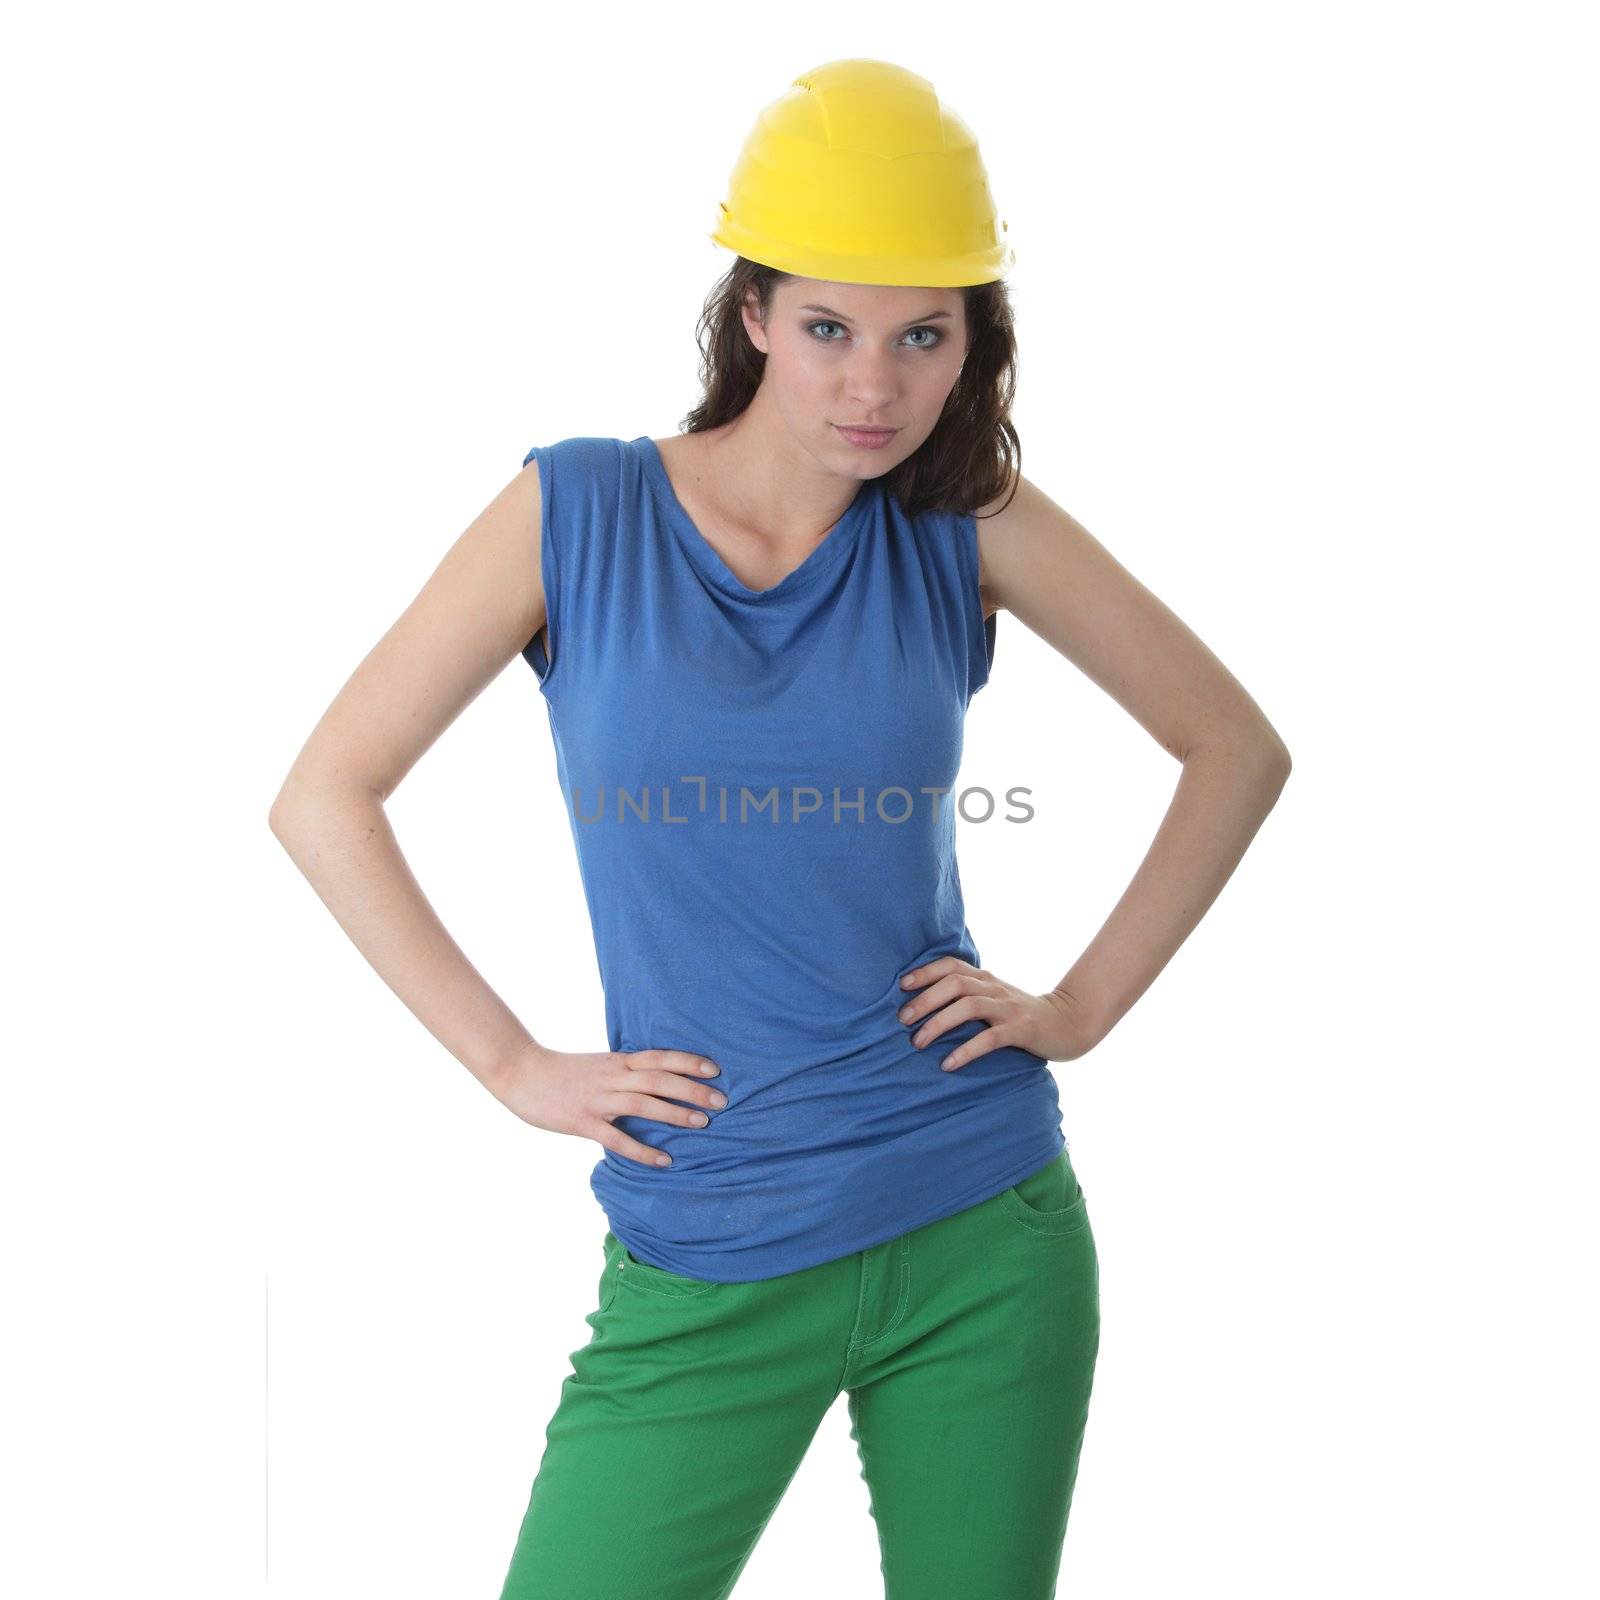 Young female architect or builder wearing a yellow hart hat on a construction site